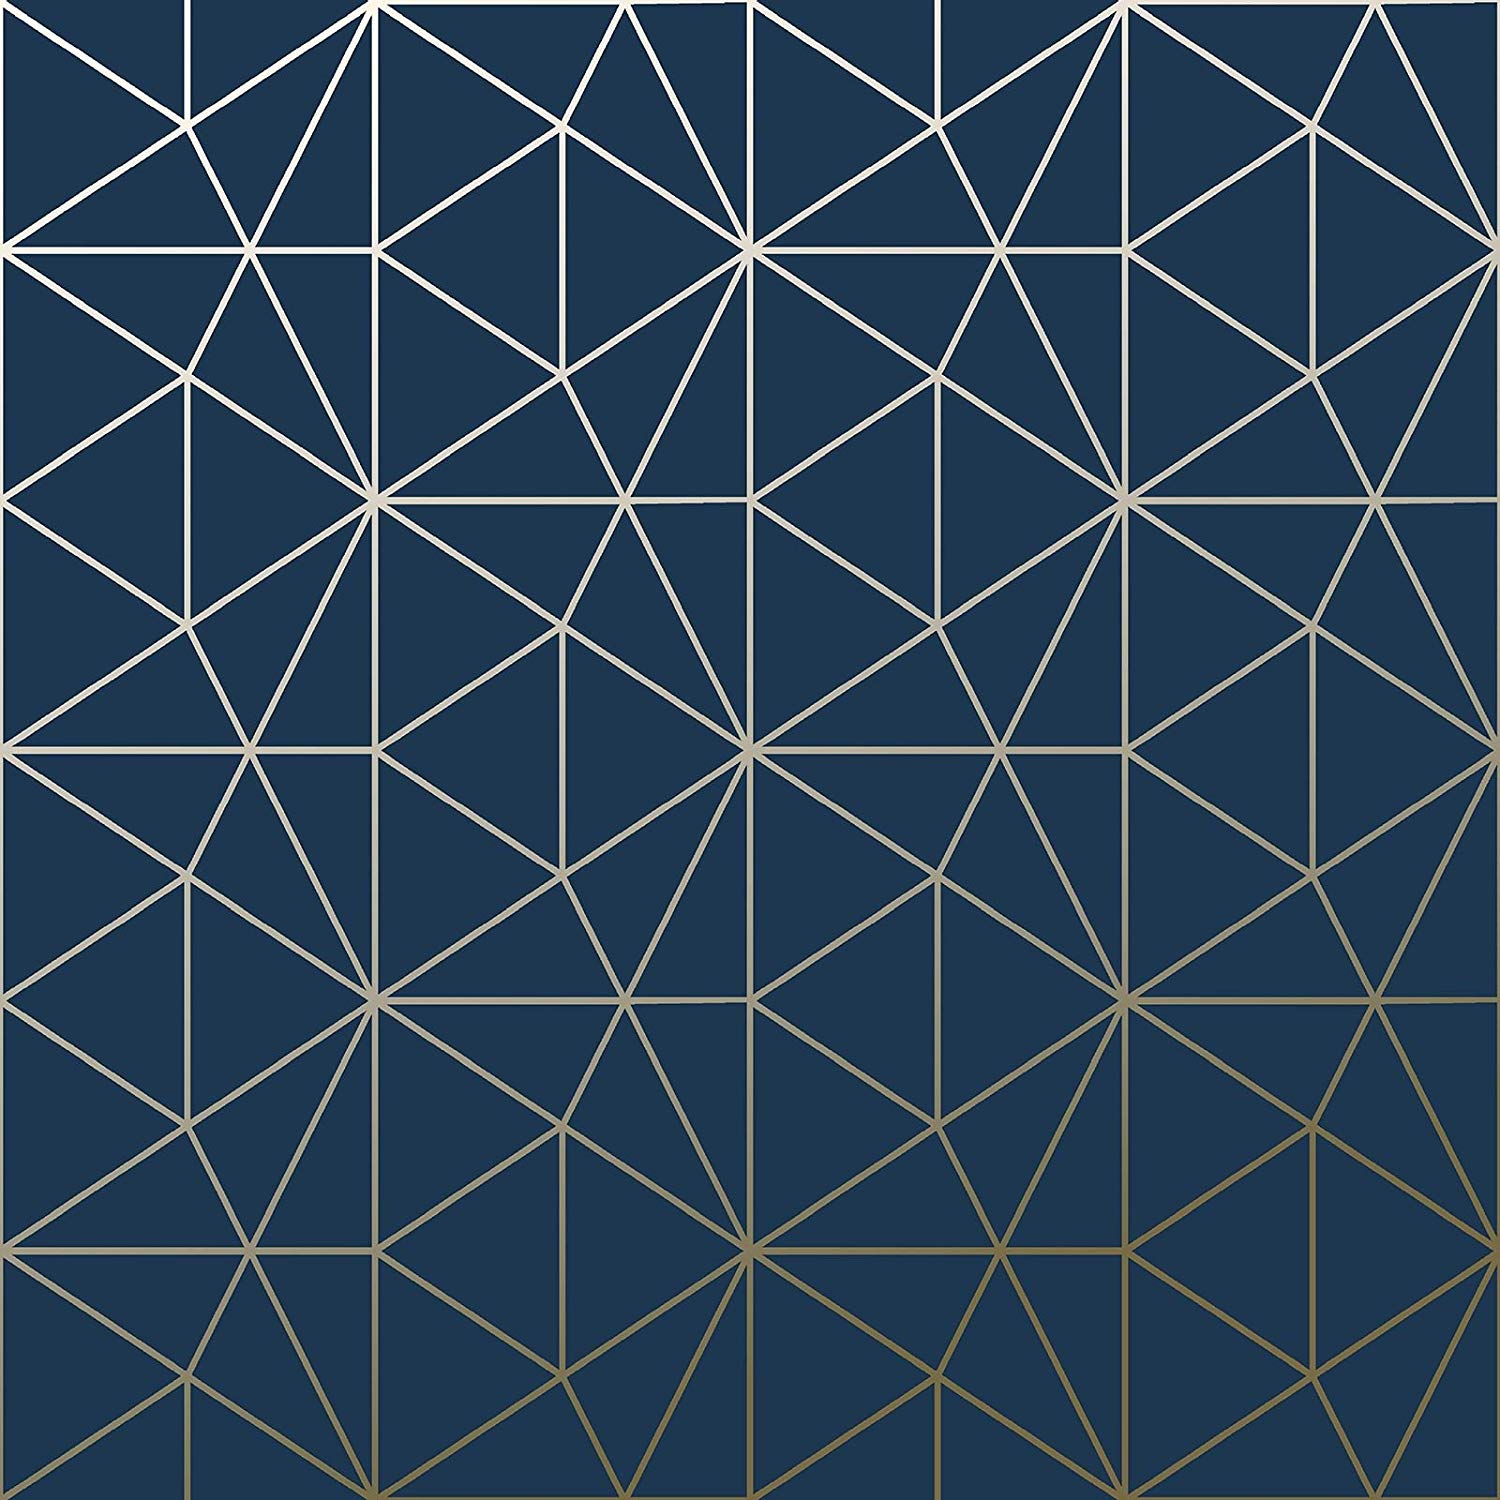 Free Download Metro Prism Geometric Triangle Wallpaper Navy Blue And